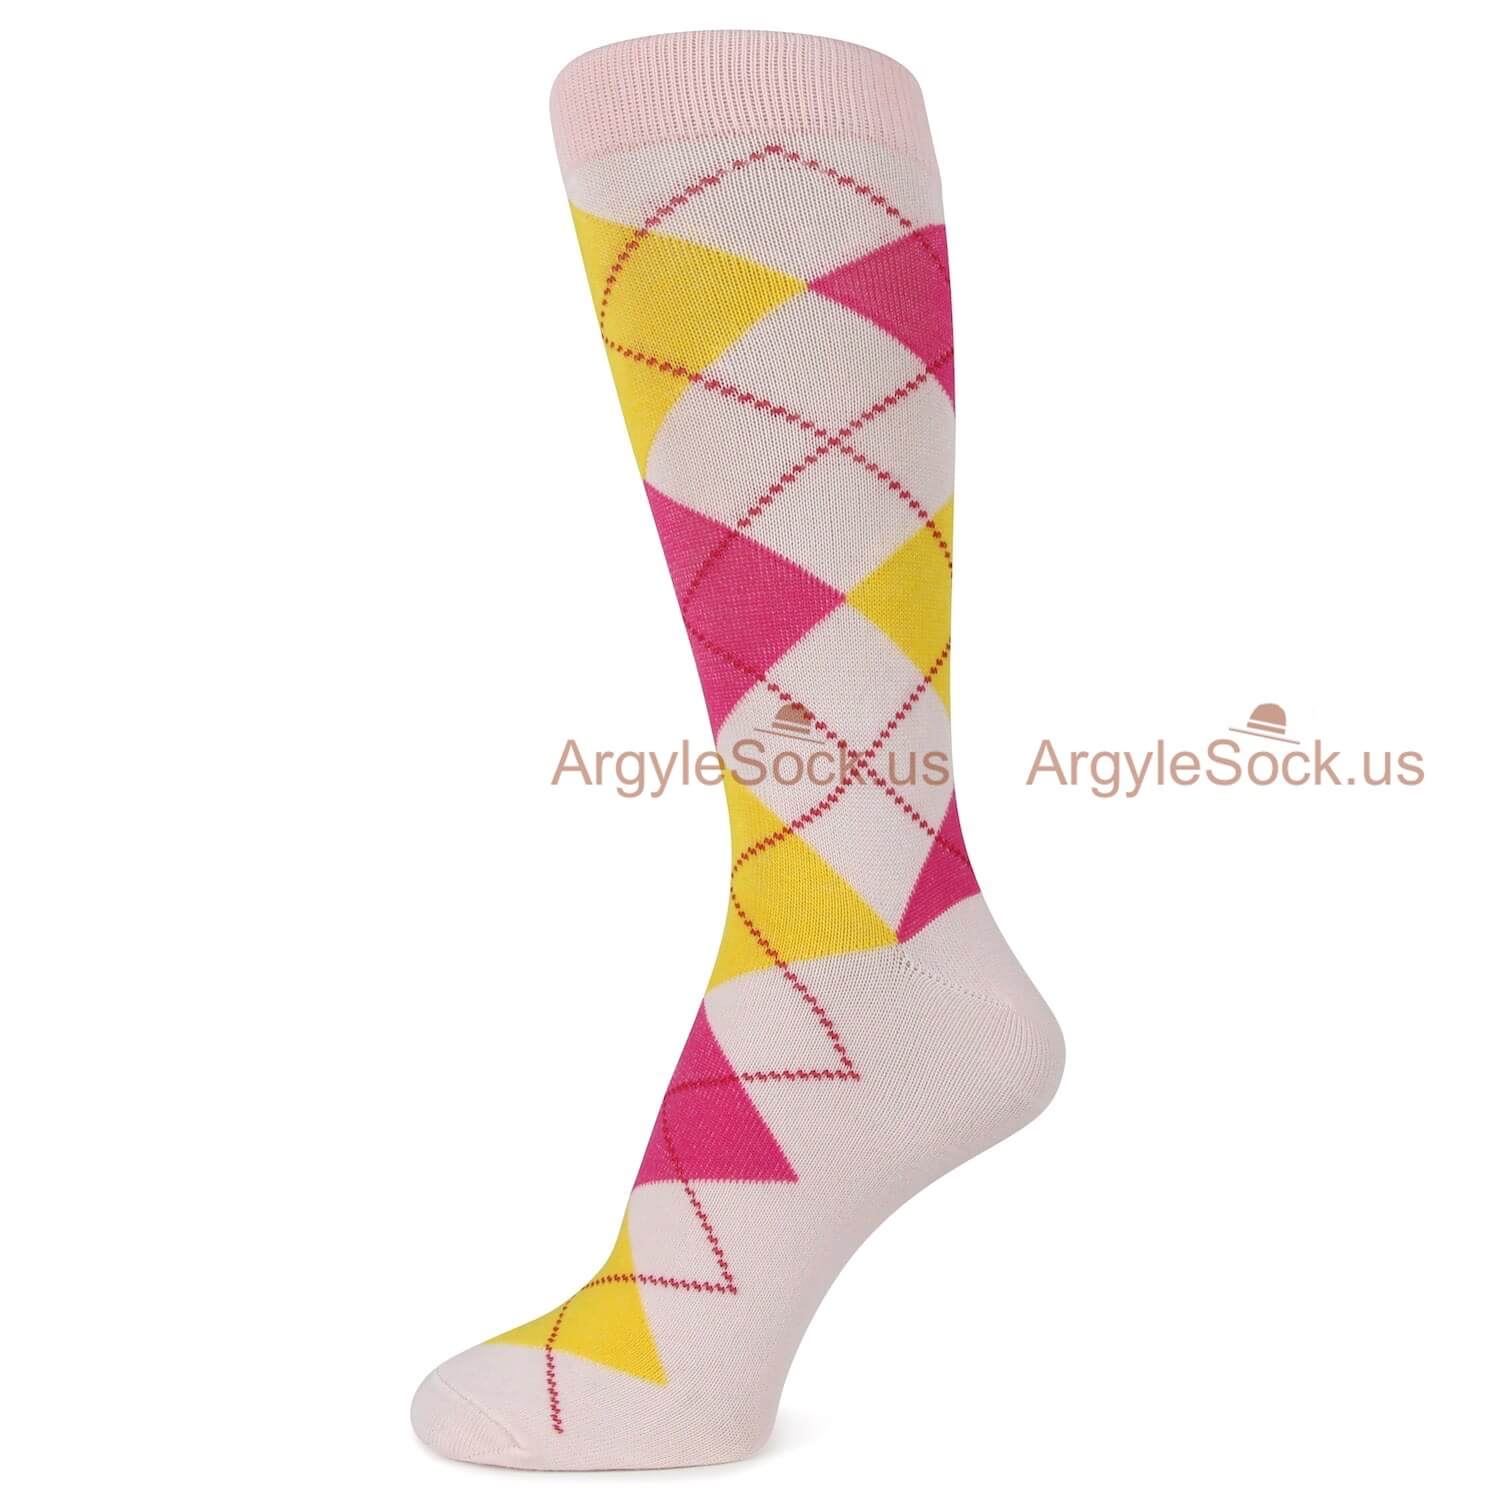 Pink and Yellow Argyle Themed Socks for Men